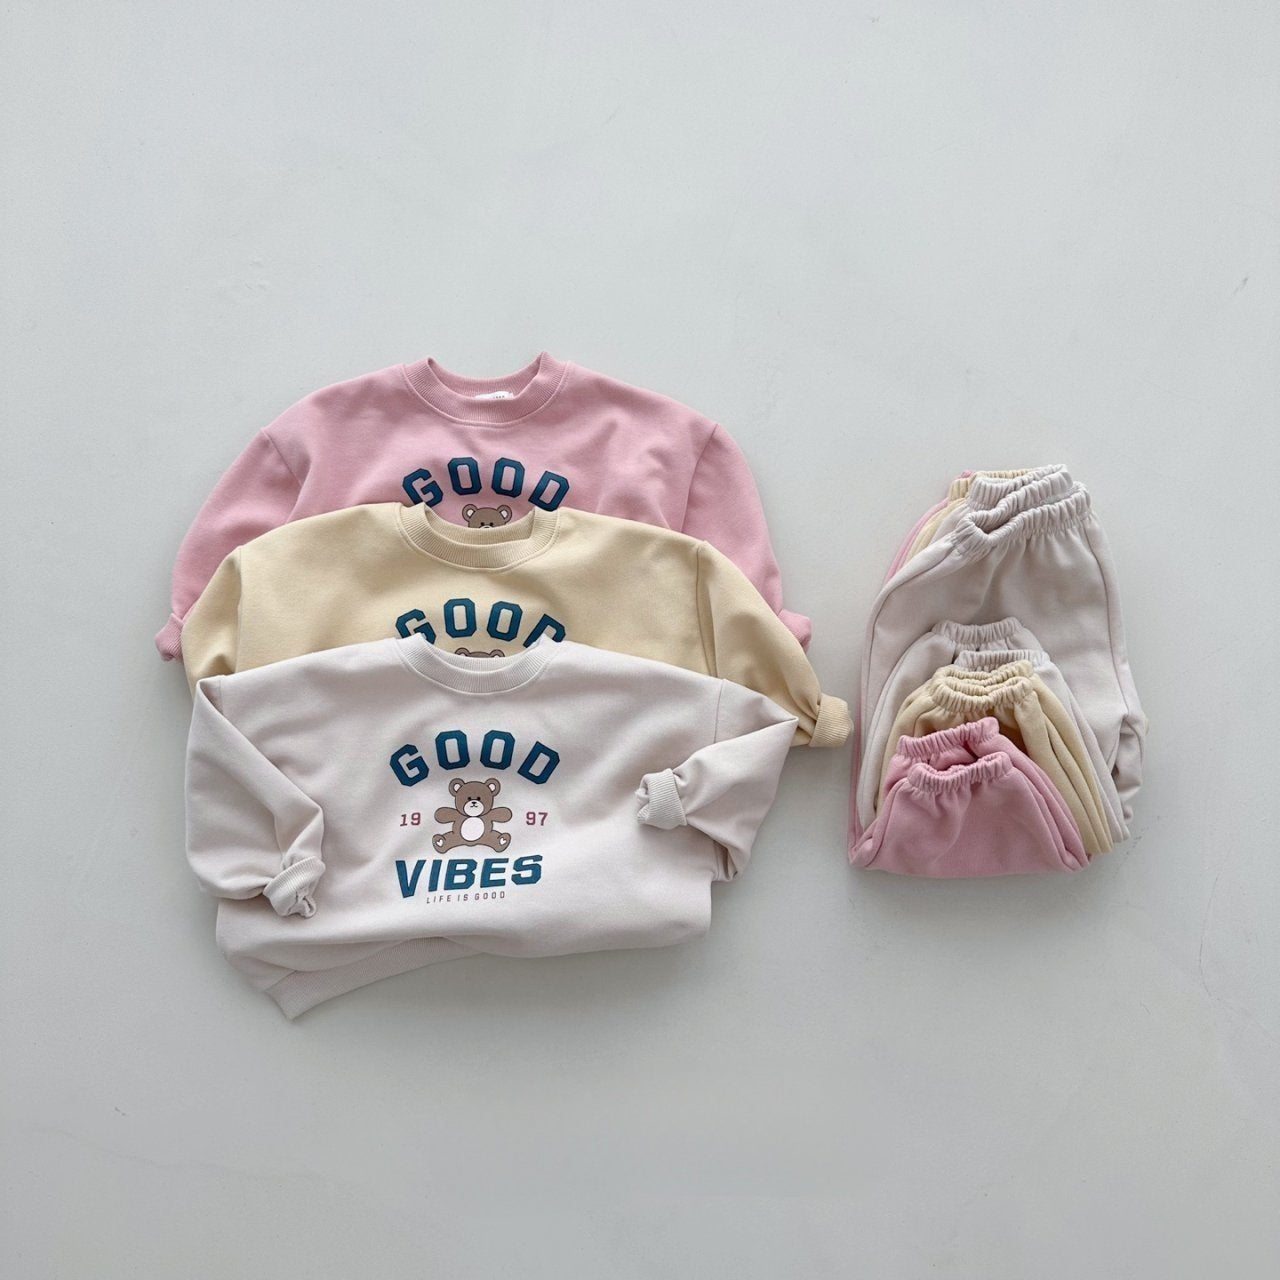 Good Vibes Slogan Tracksuit for Boys and Girls